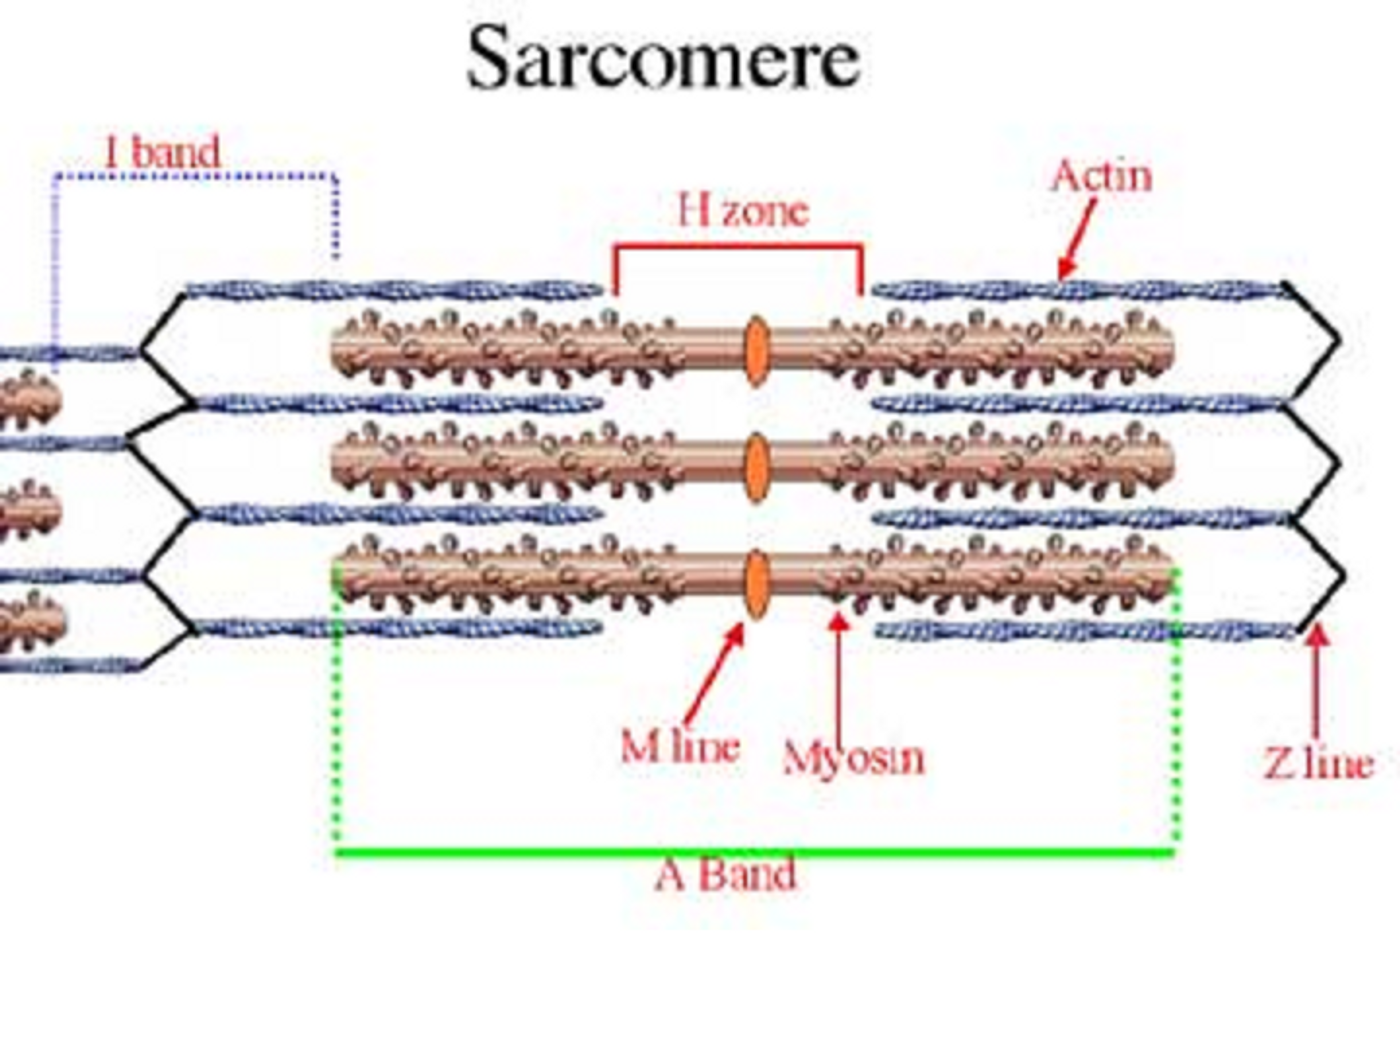 The sarcomeres, which are the contractile units of the muscle, are made up of several distinct regions which are discernable by electron microscopy. 